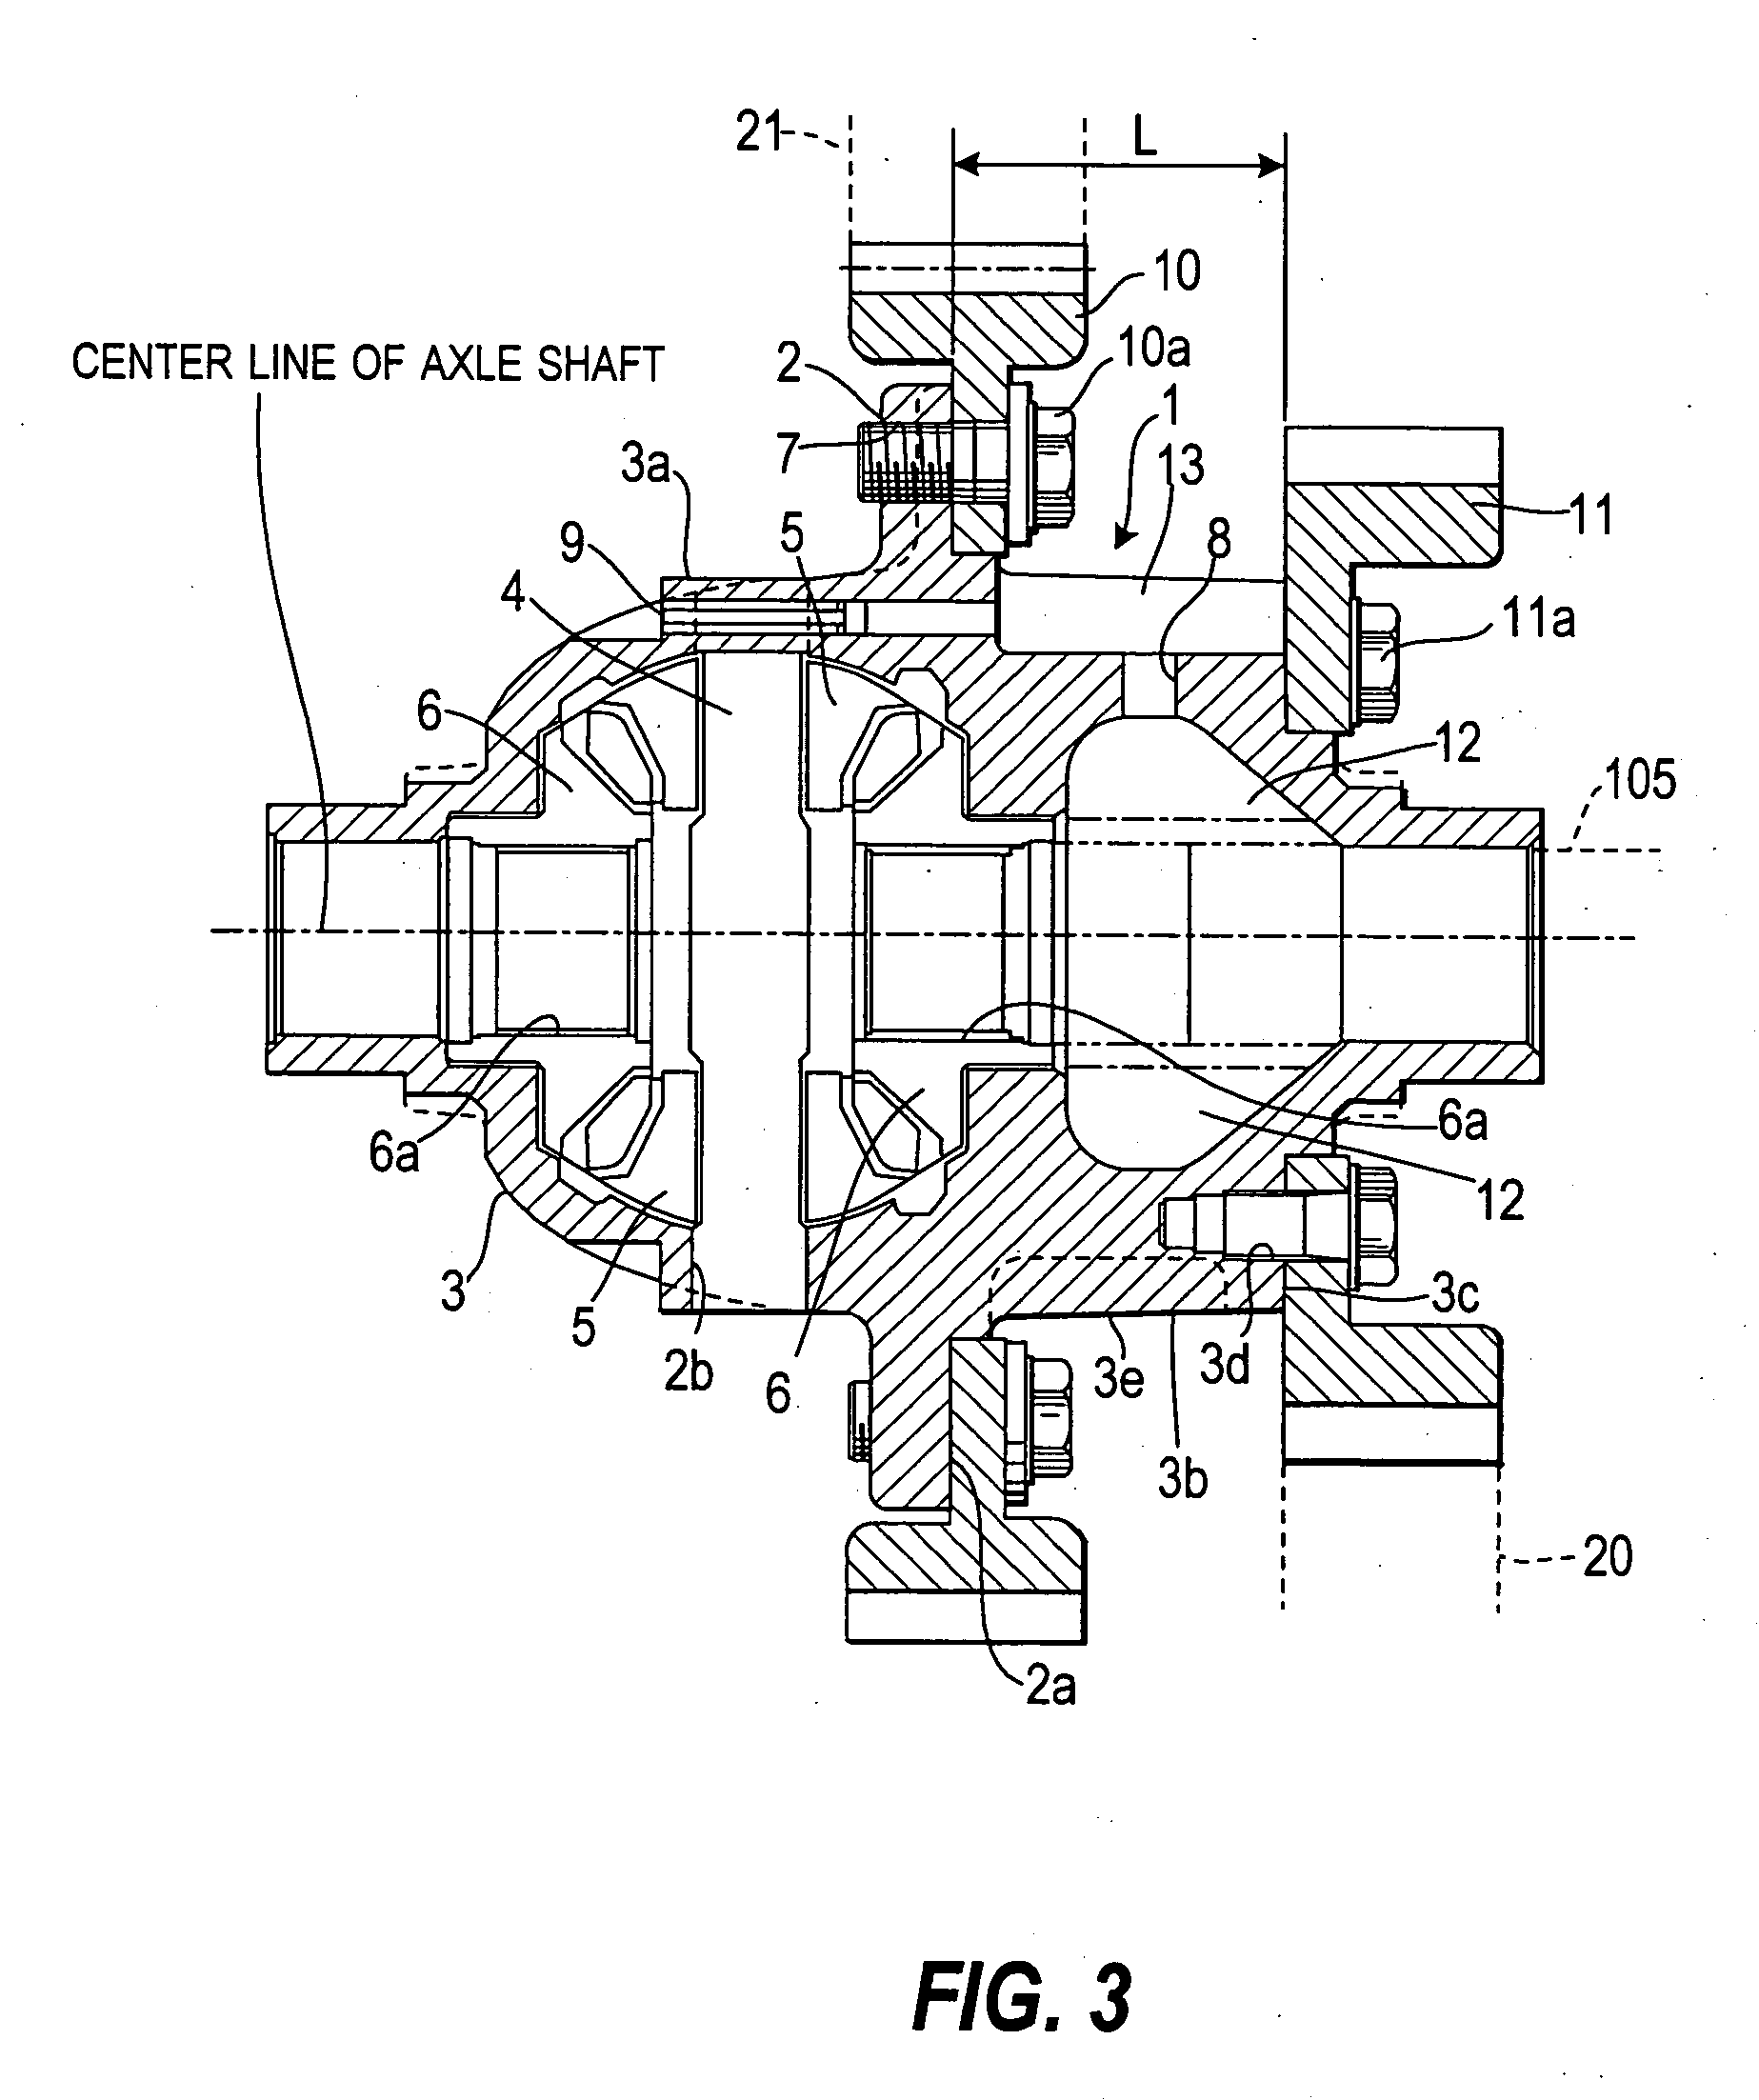 Drive mechanism for a four wheel drive transverse engine-mounted vehicle